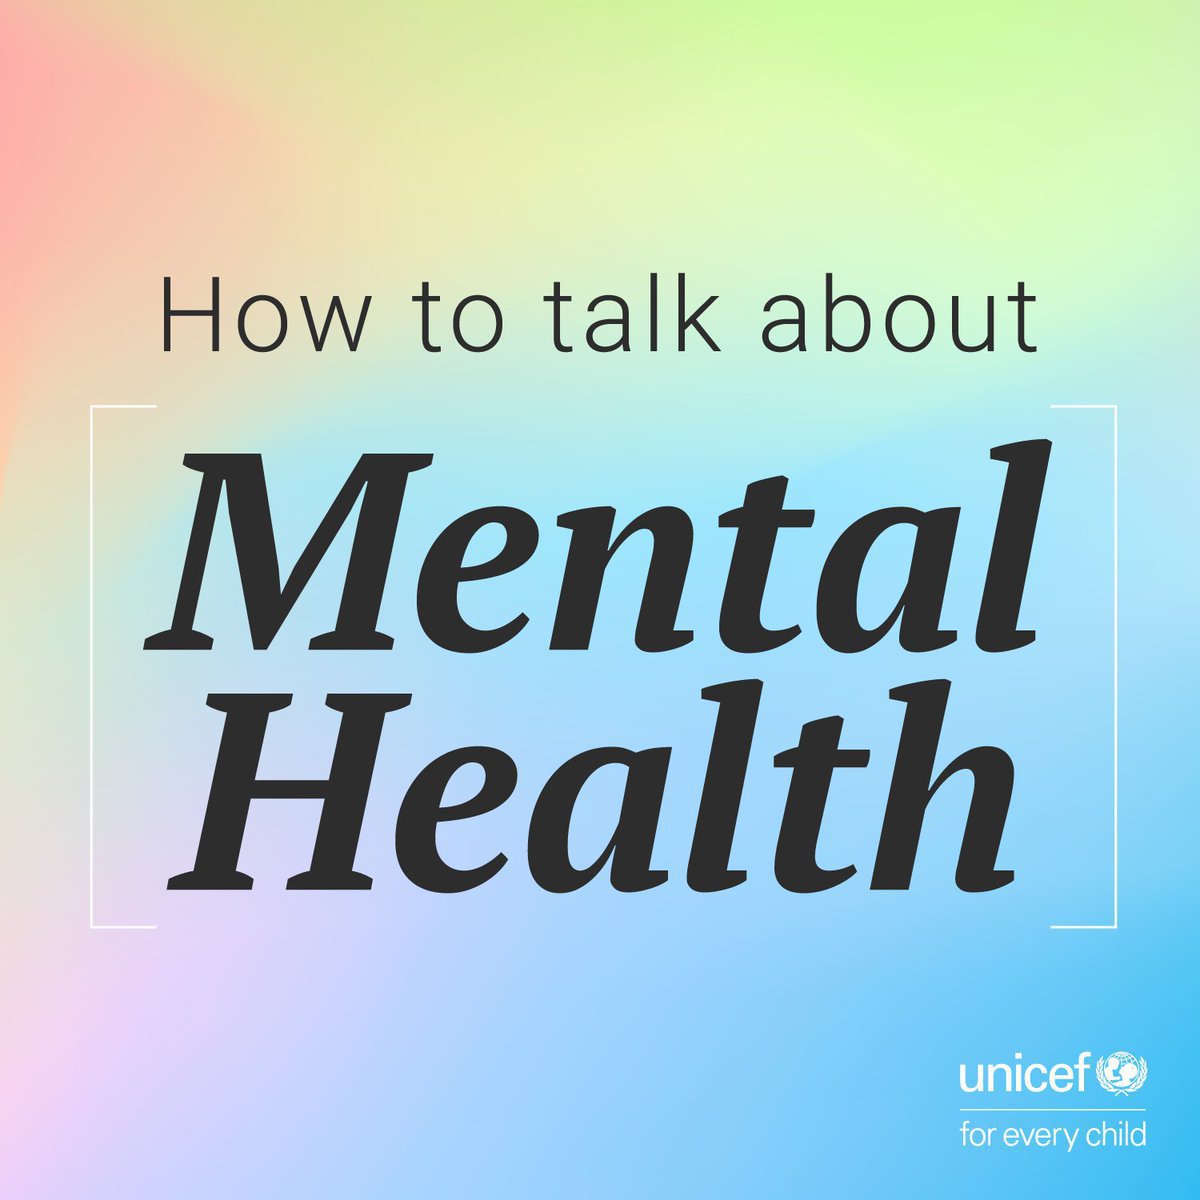 No one should have to deal with mental health challenges on their own. Yet, too many children & young people face their issues alone. During May’s #MentalHealthAwarenessMonth, @UNICEF shares tips on how to start important mental health conversations. unicef.org/parenting/ment…